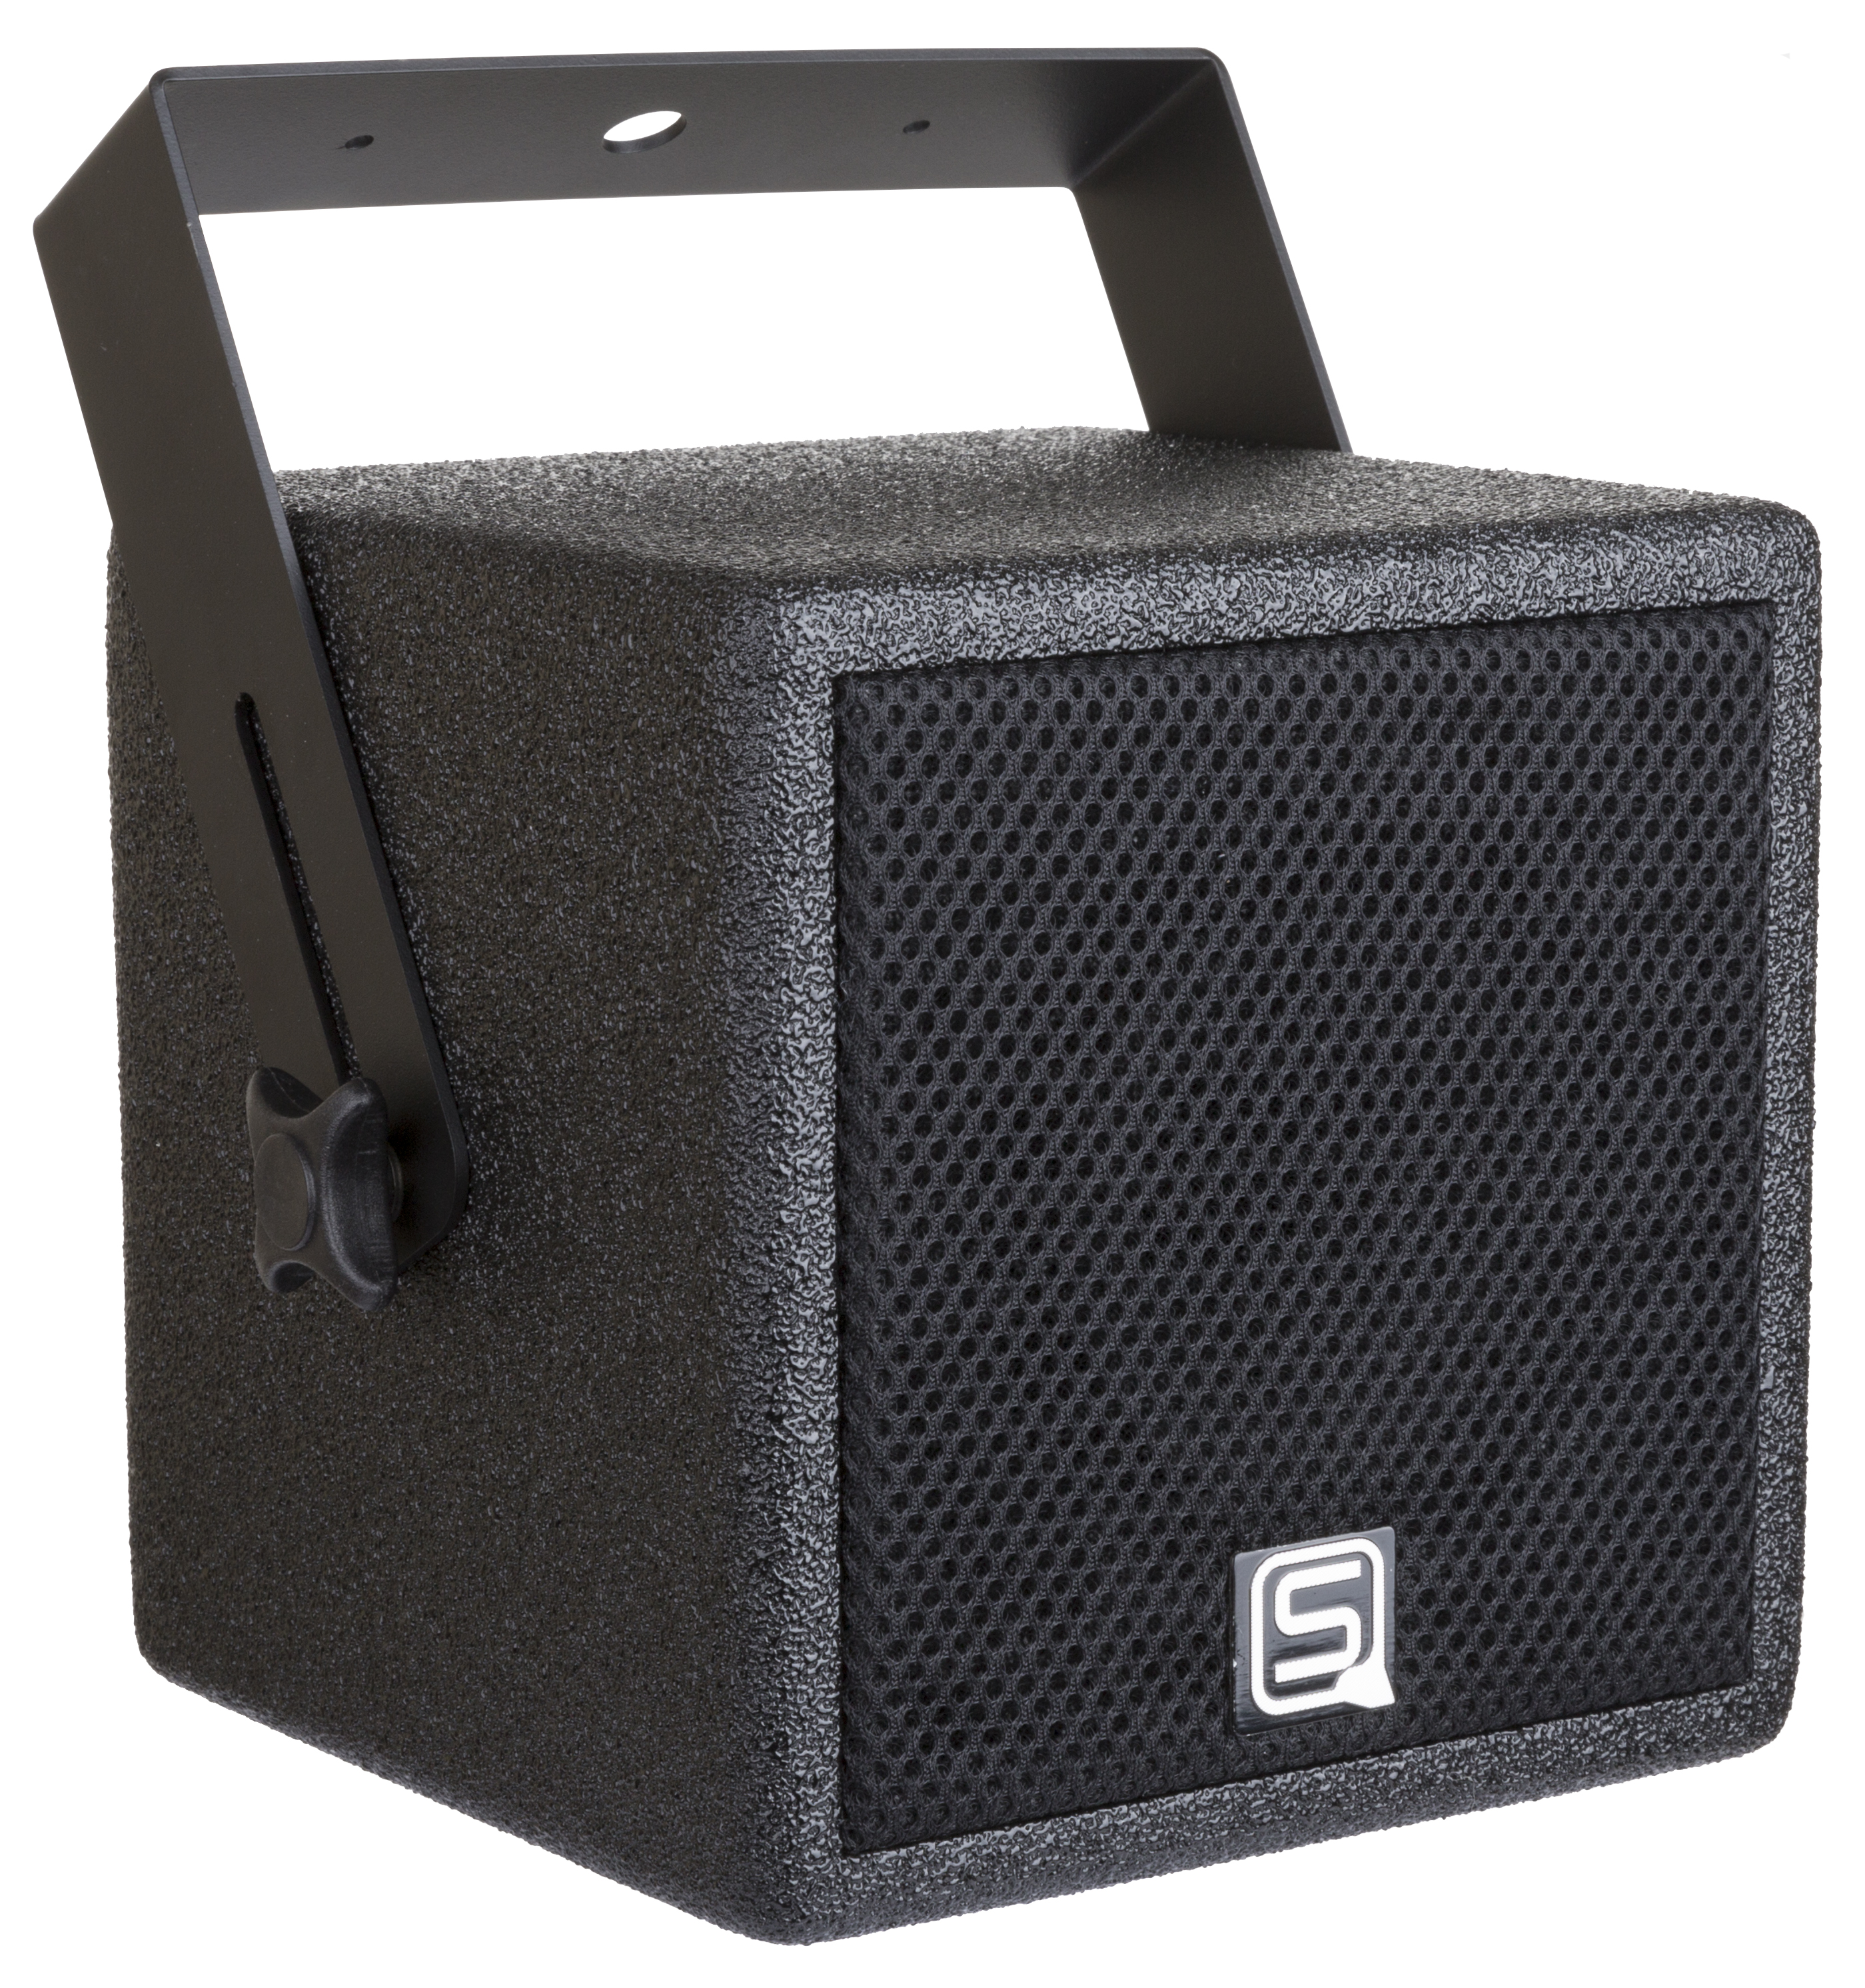 Small cube with 5" coaxial speaker - black finish